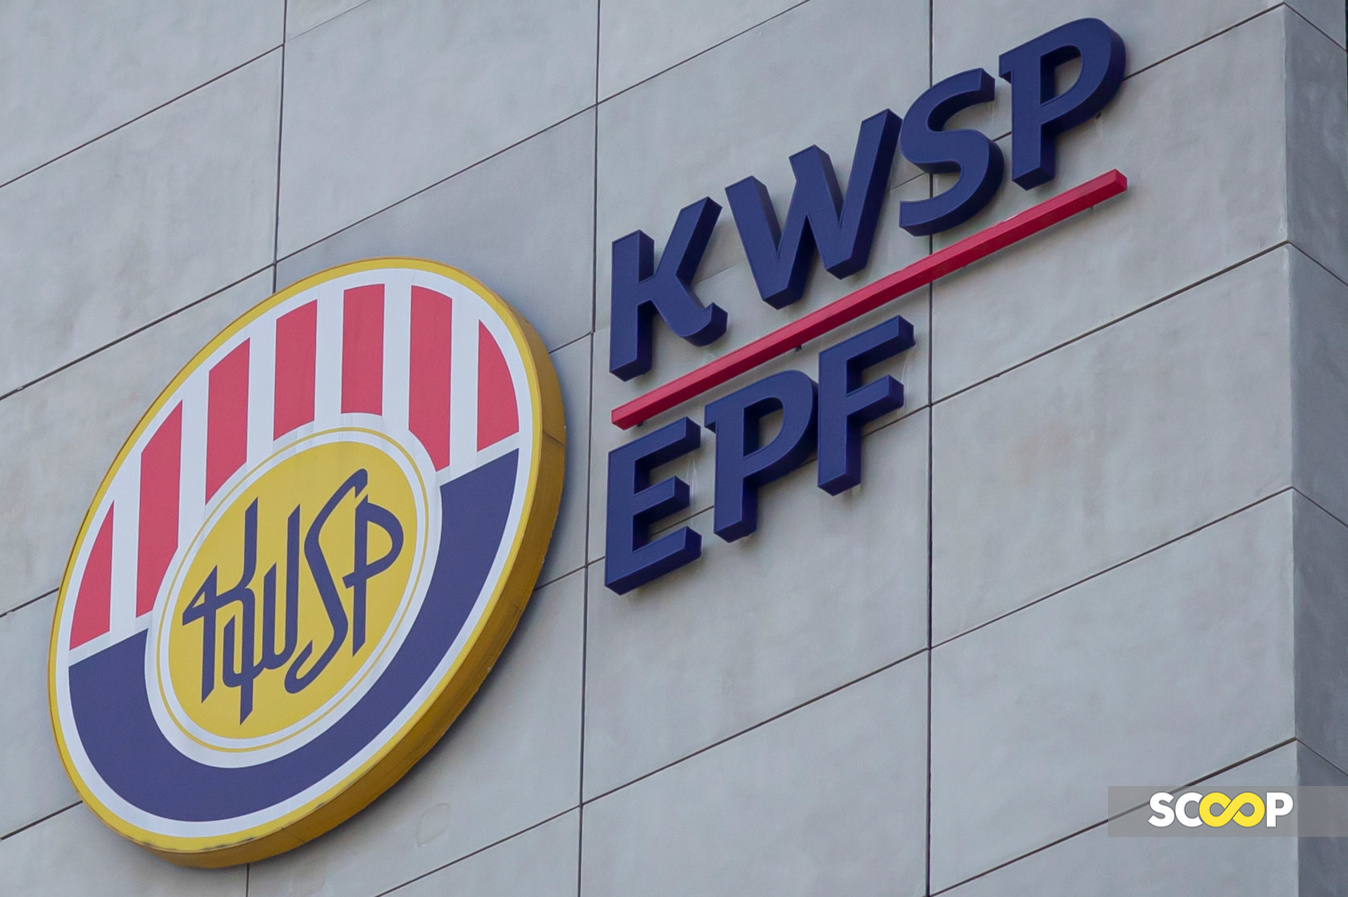 EPF to announce new CEO soon as Amir Hamzah moves to finance minister II role